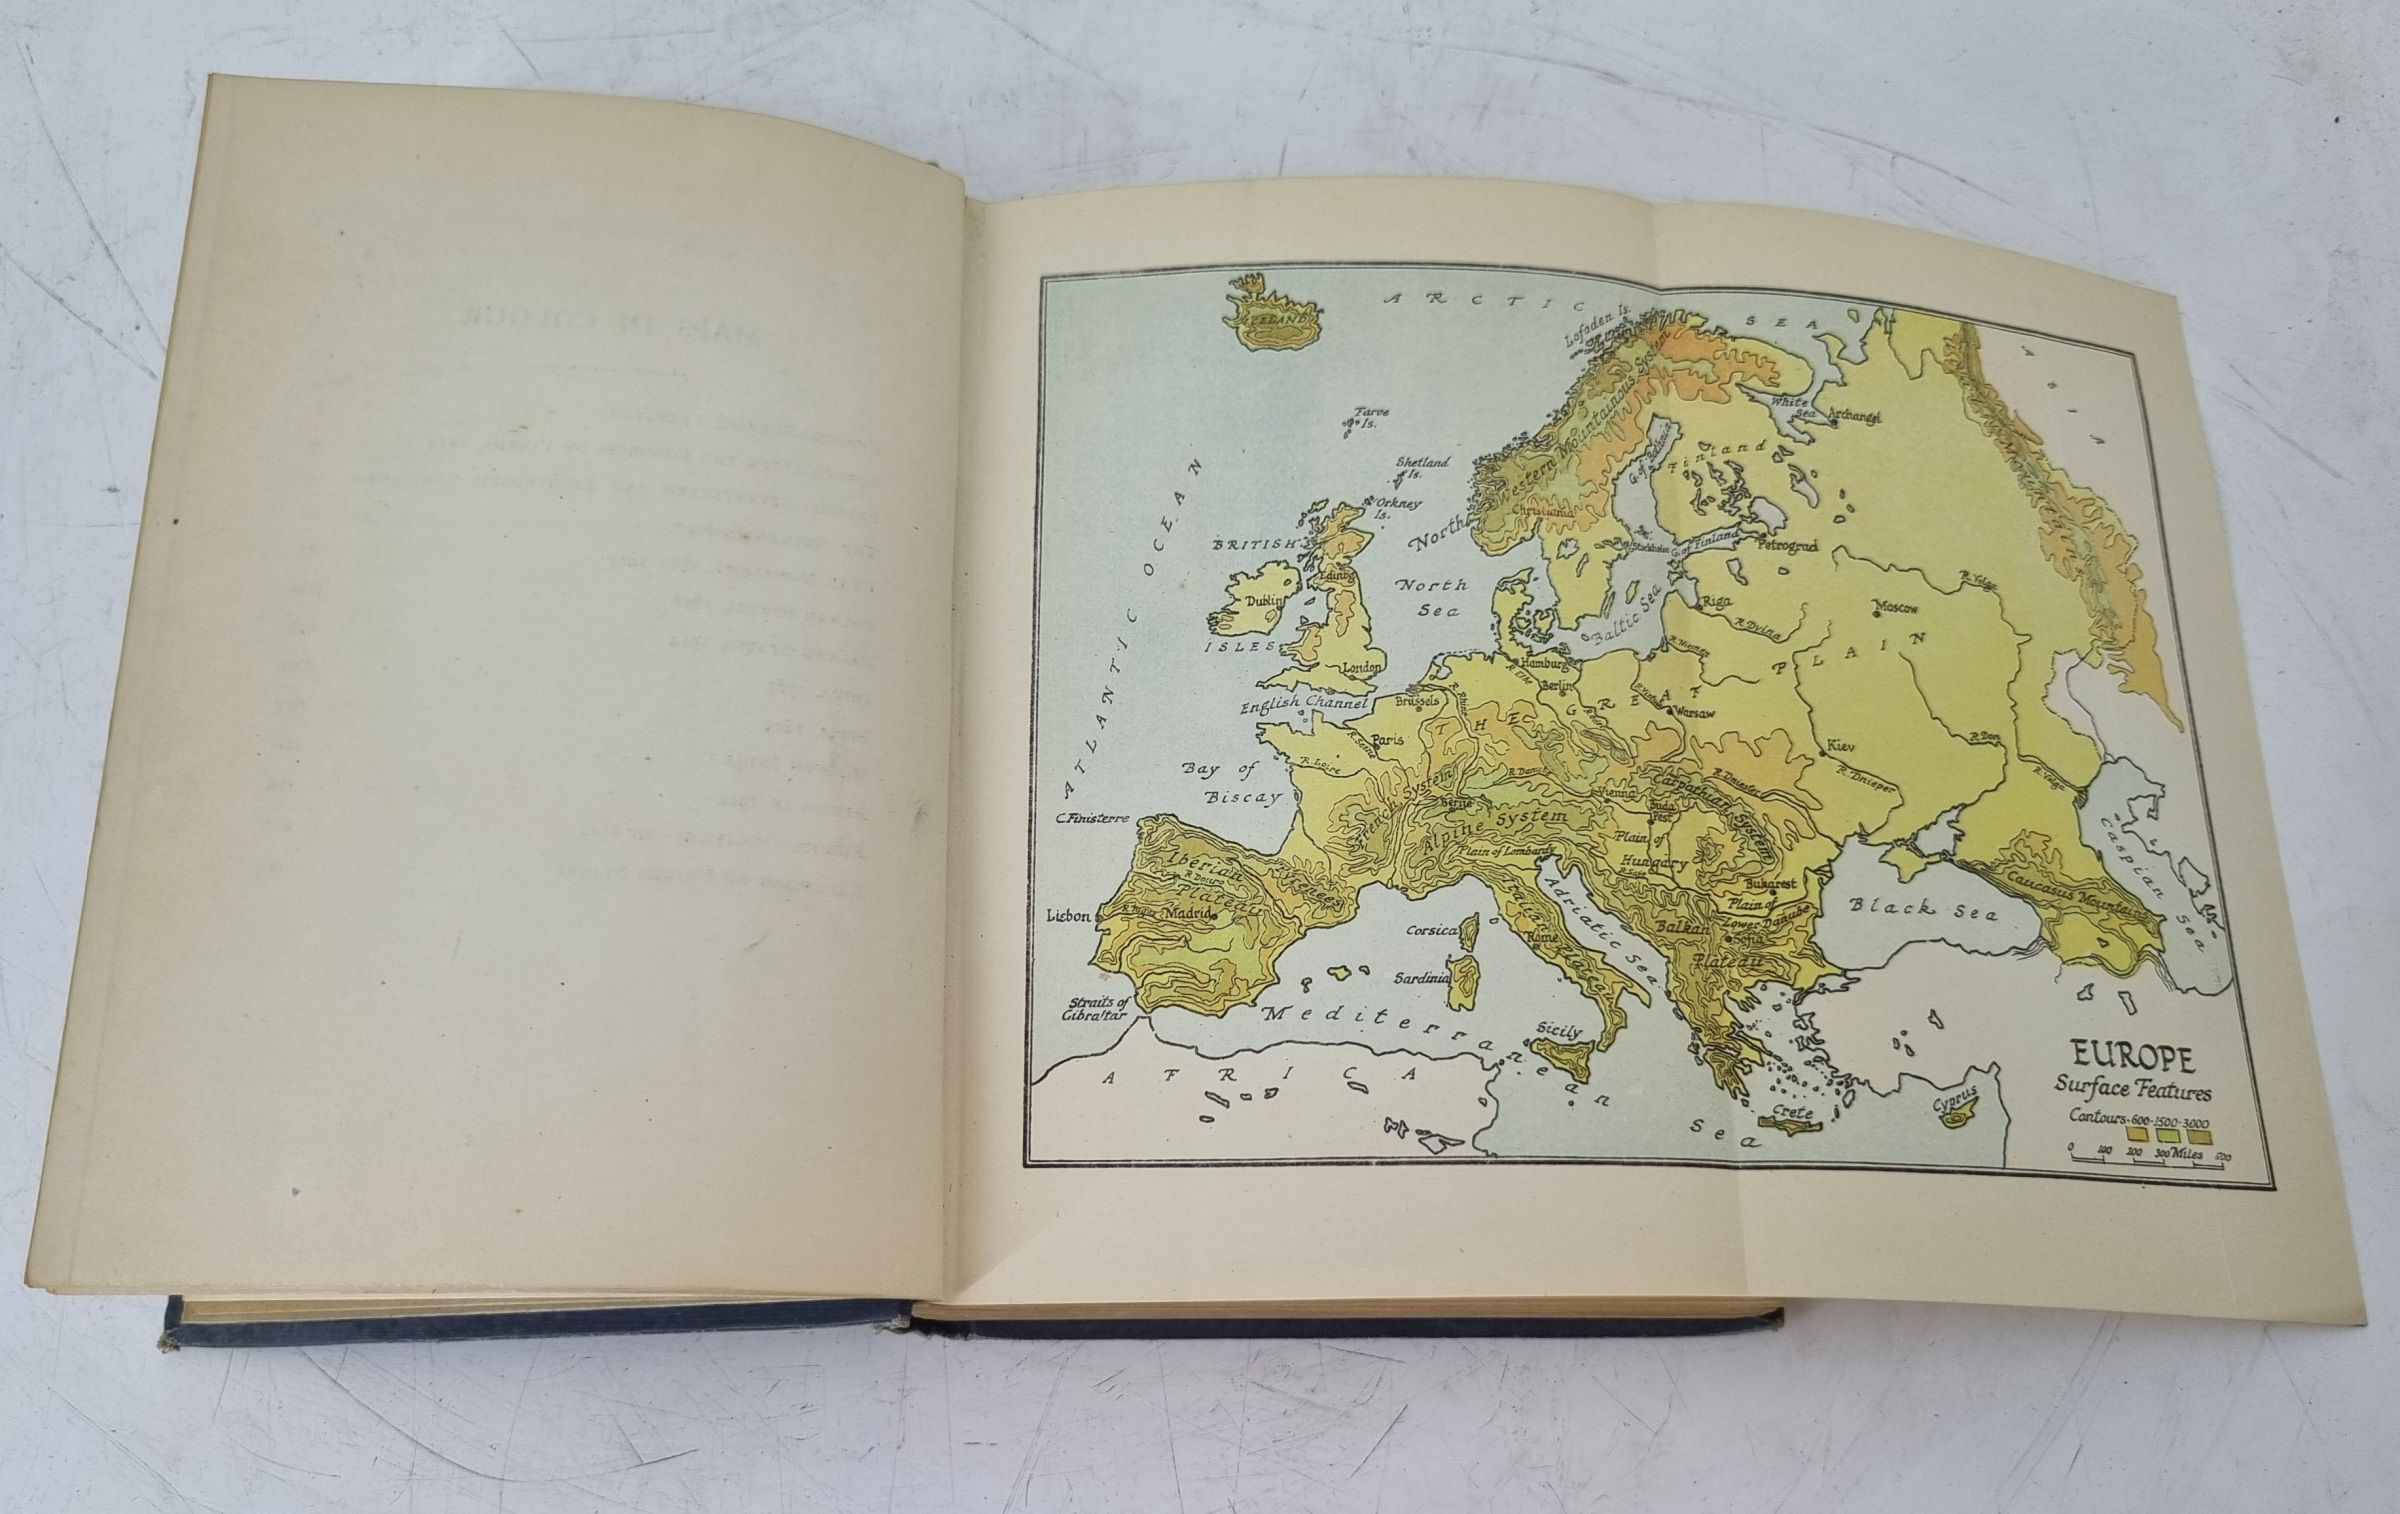 Holland & Britain by Charles Wilson, Journey Without Maps A Travel Book by Graham Greene - Published - Image 14 of 18